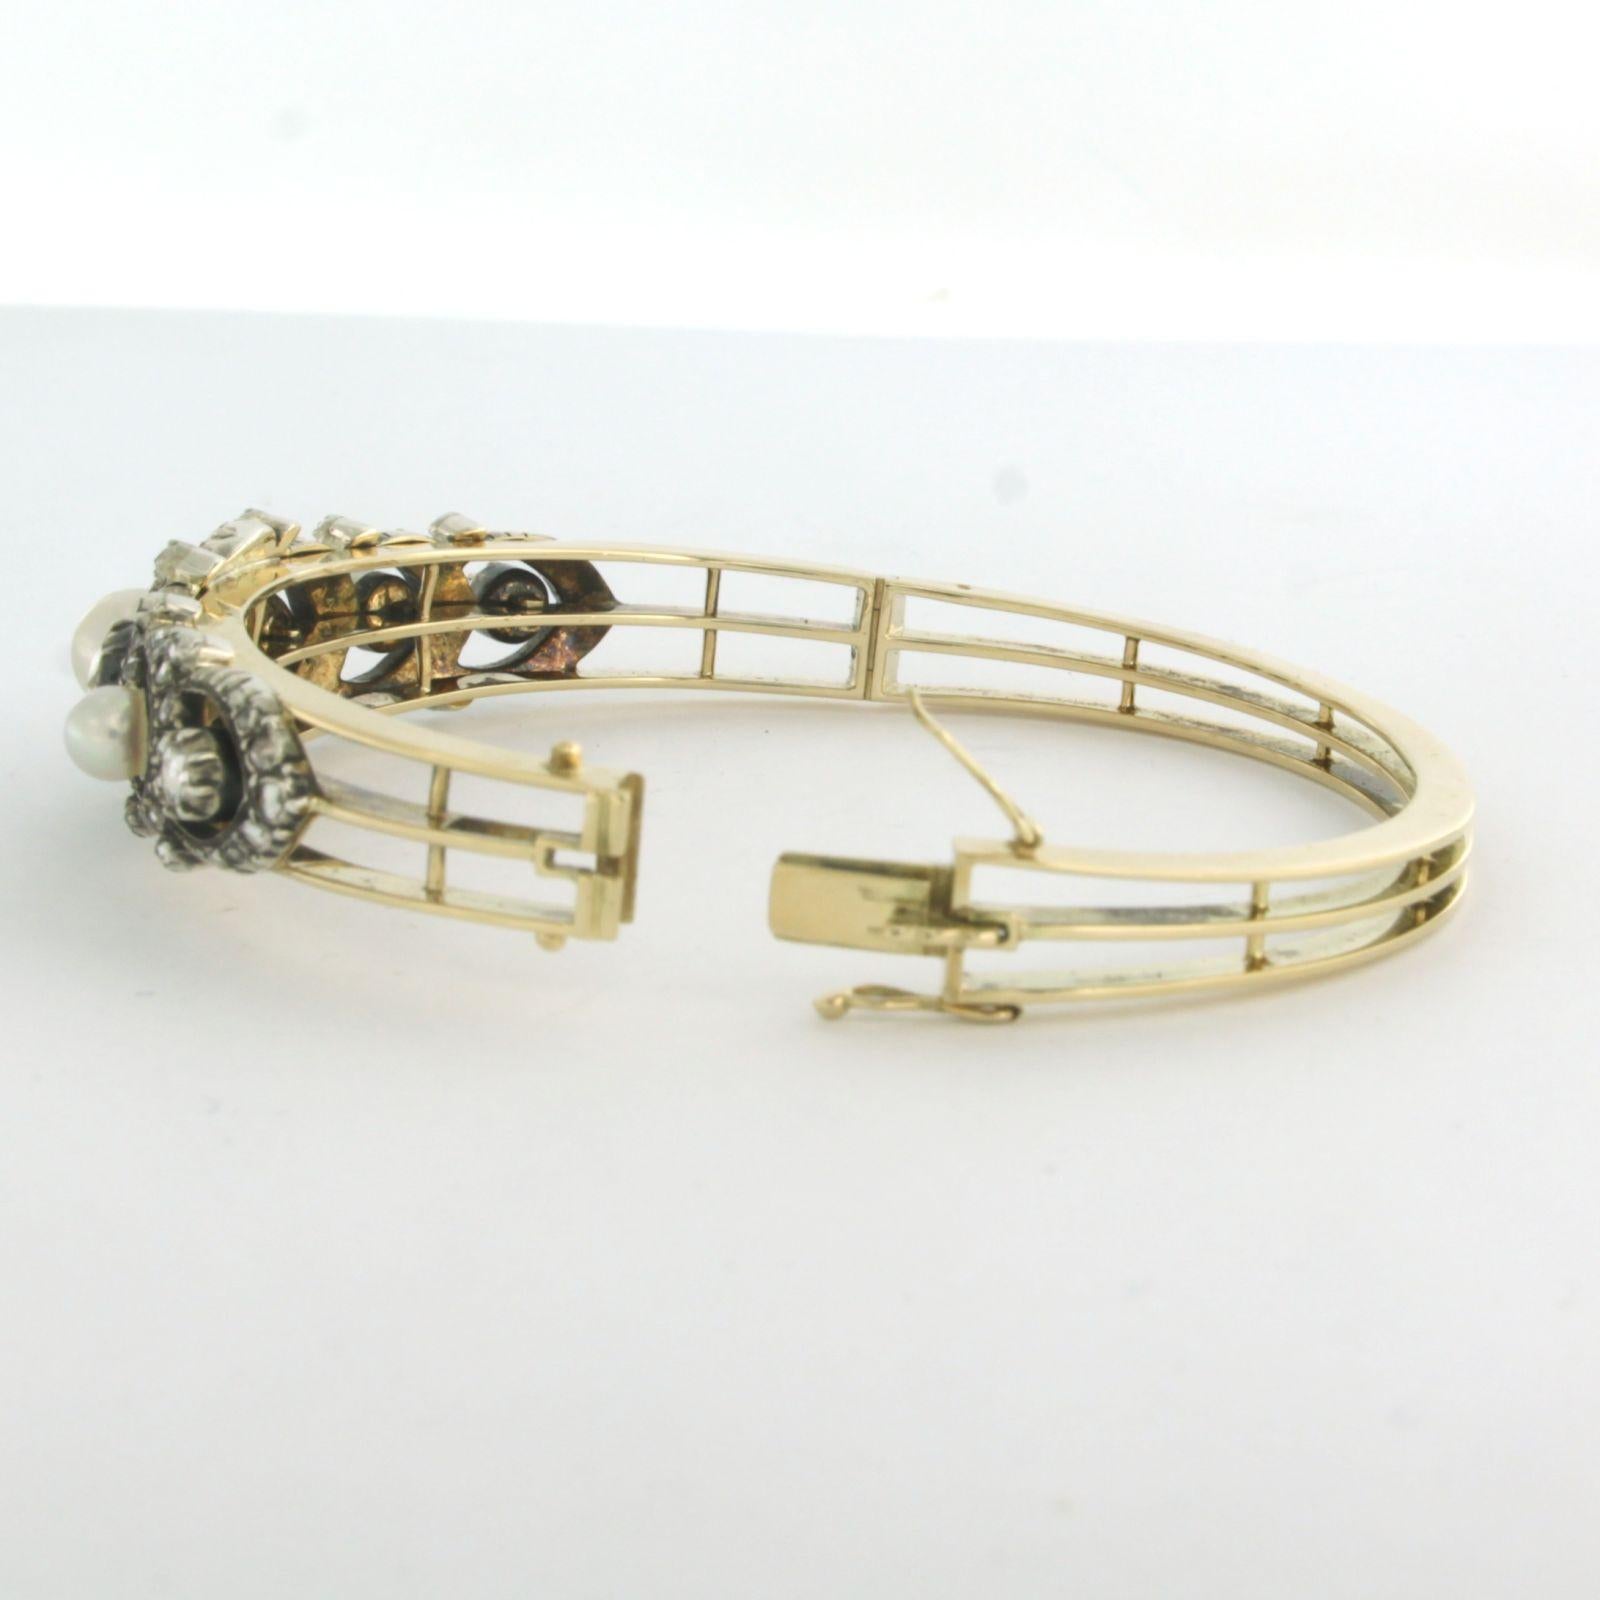 Clamper Bracelet set with pearls and diamonds 14k yellow gold and silver For Sale 2